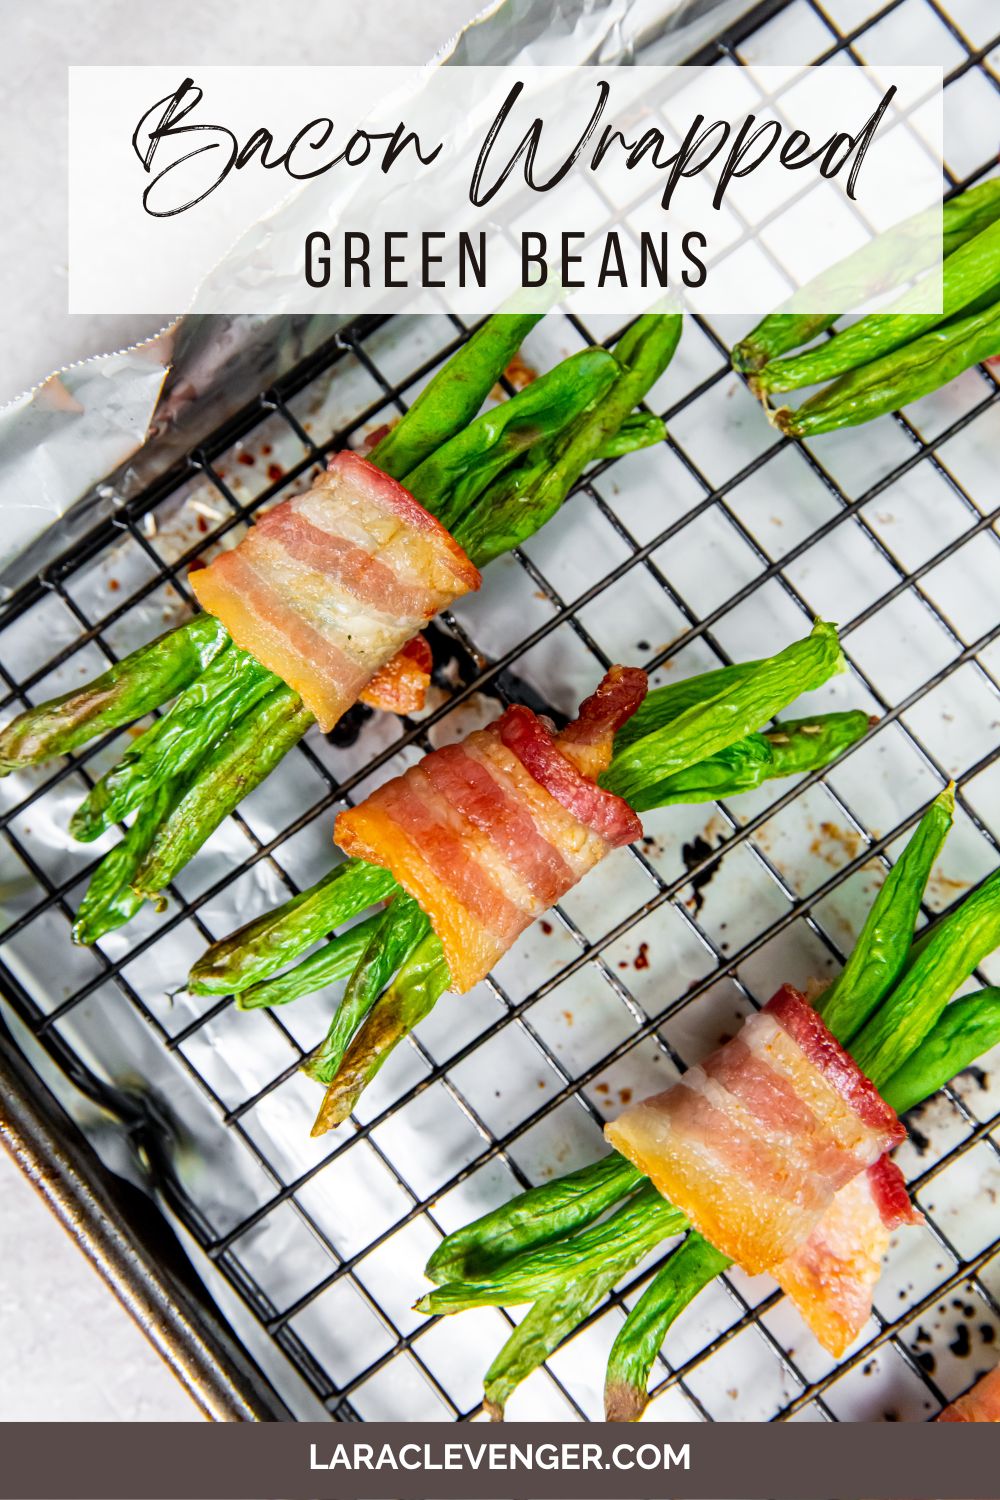 pin of bacon wrapped green beans on a baking sheet